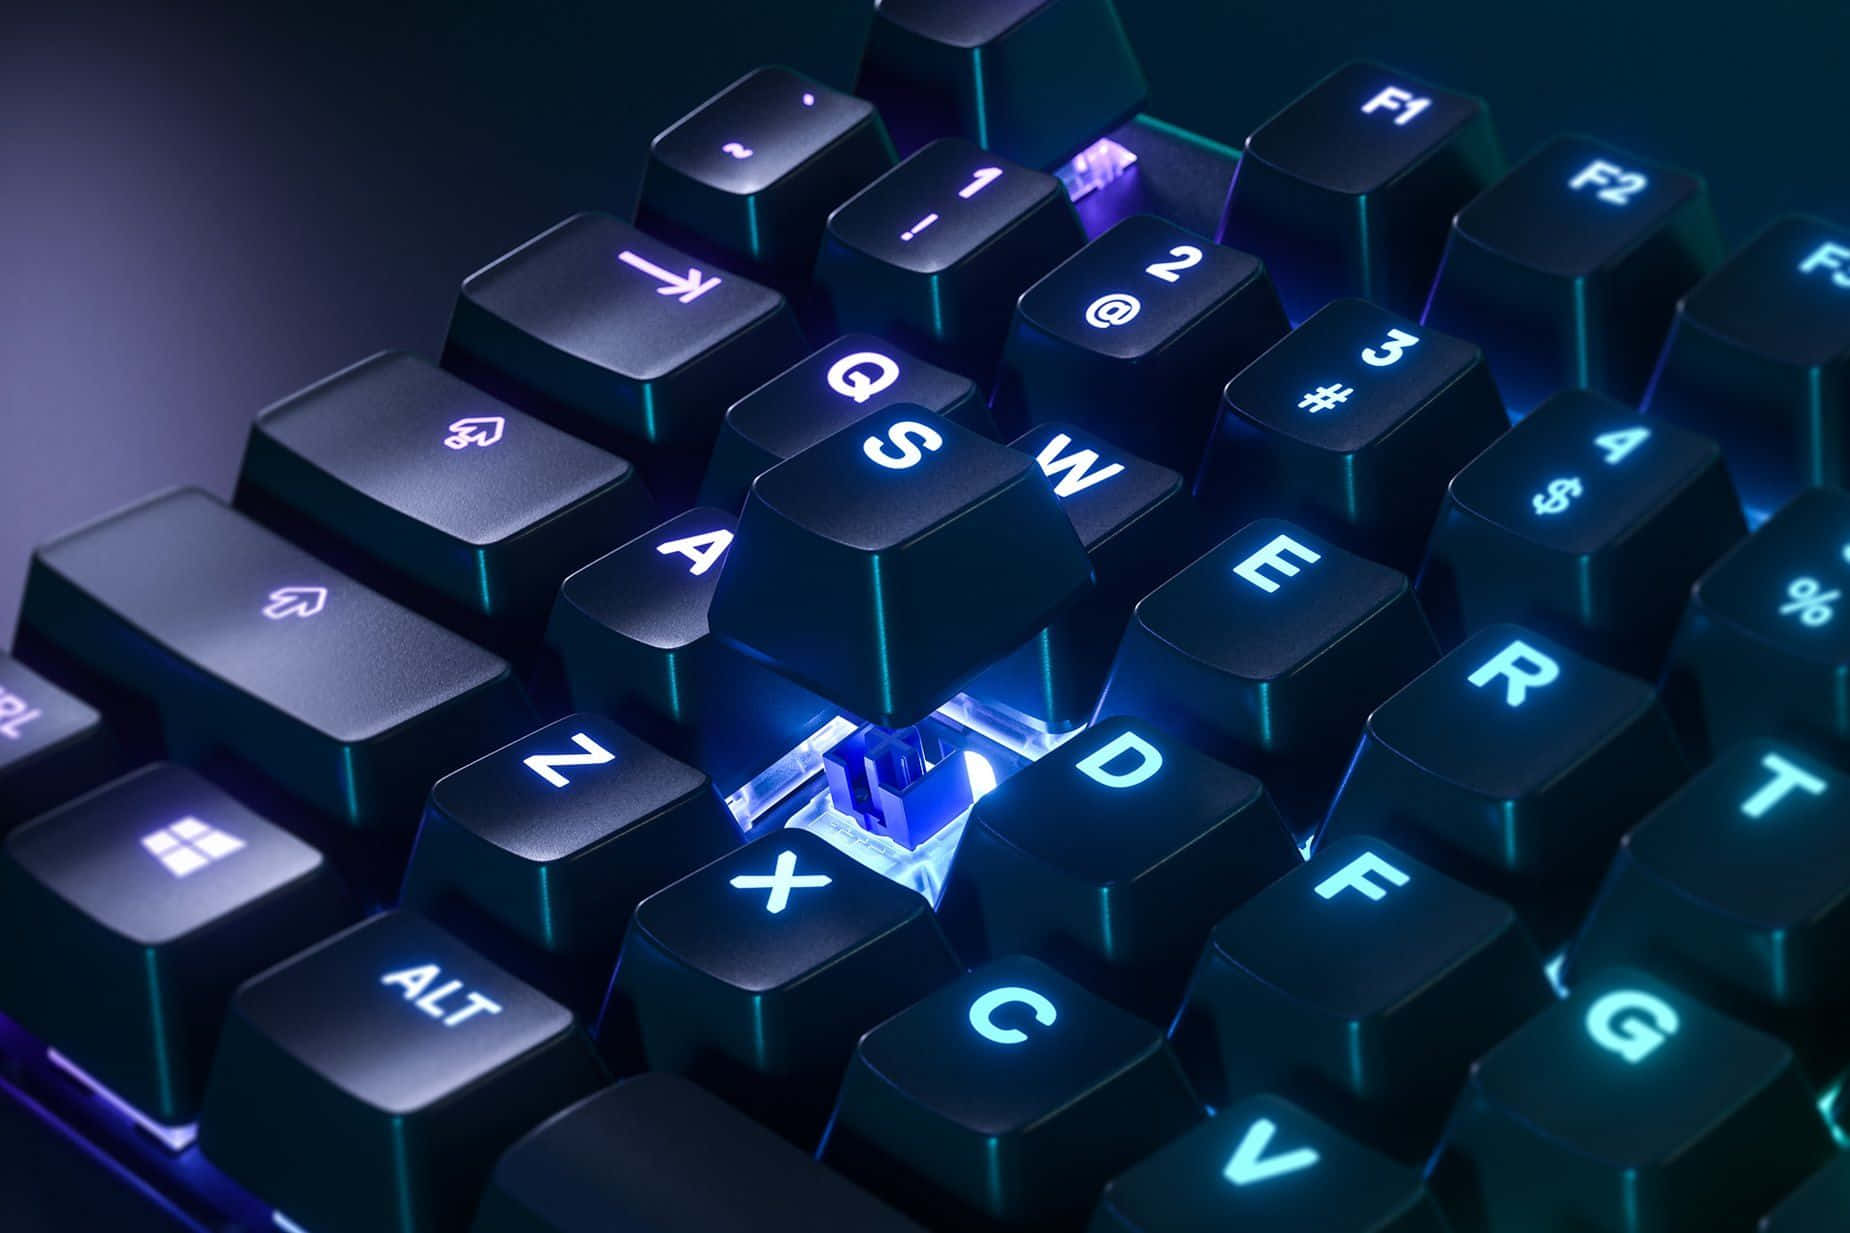 Enhance your gaming abilities with the powerful gaming keyboards. Wallpaper